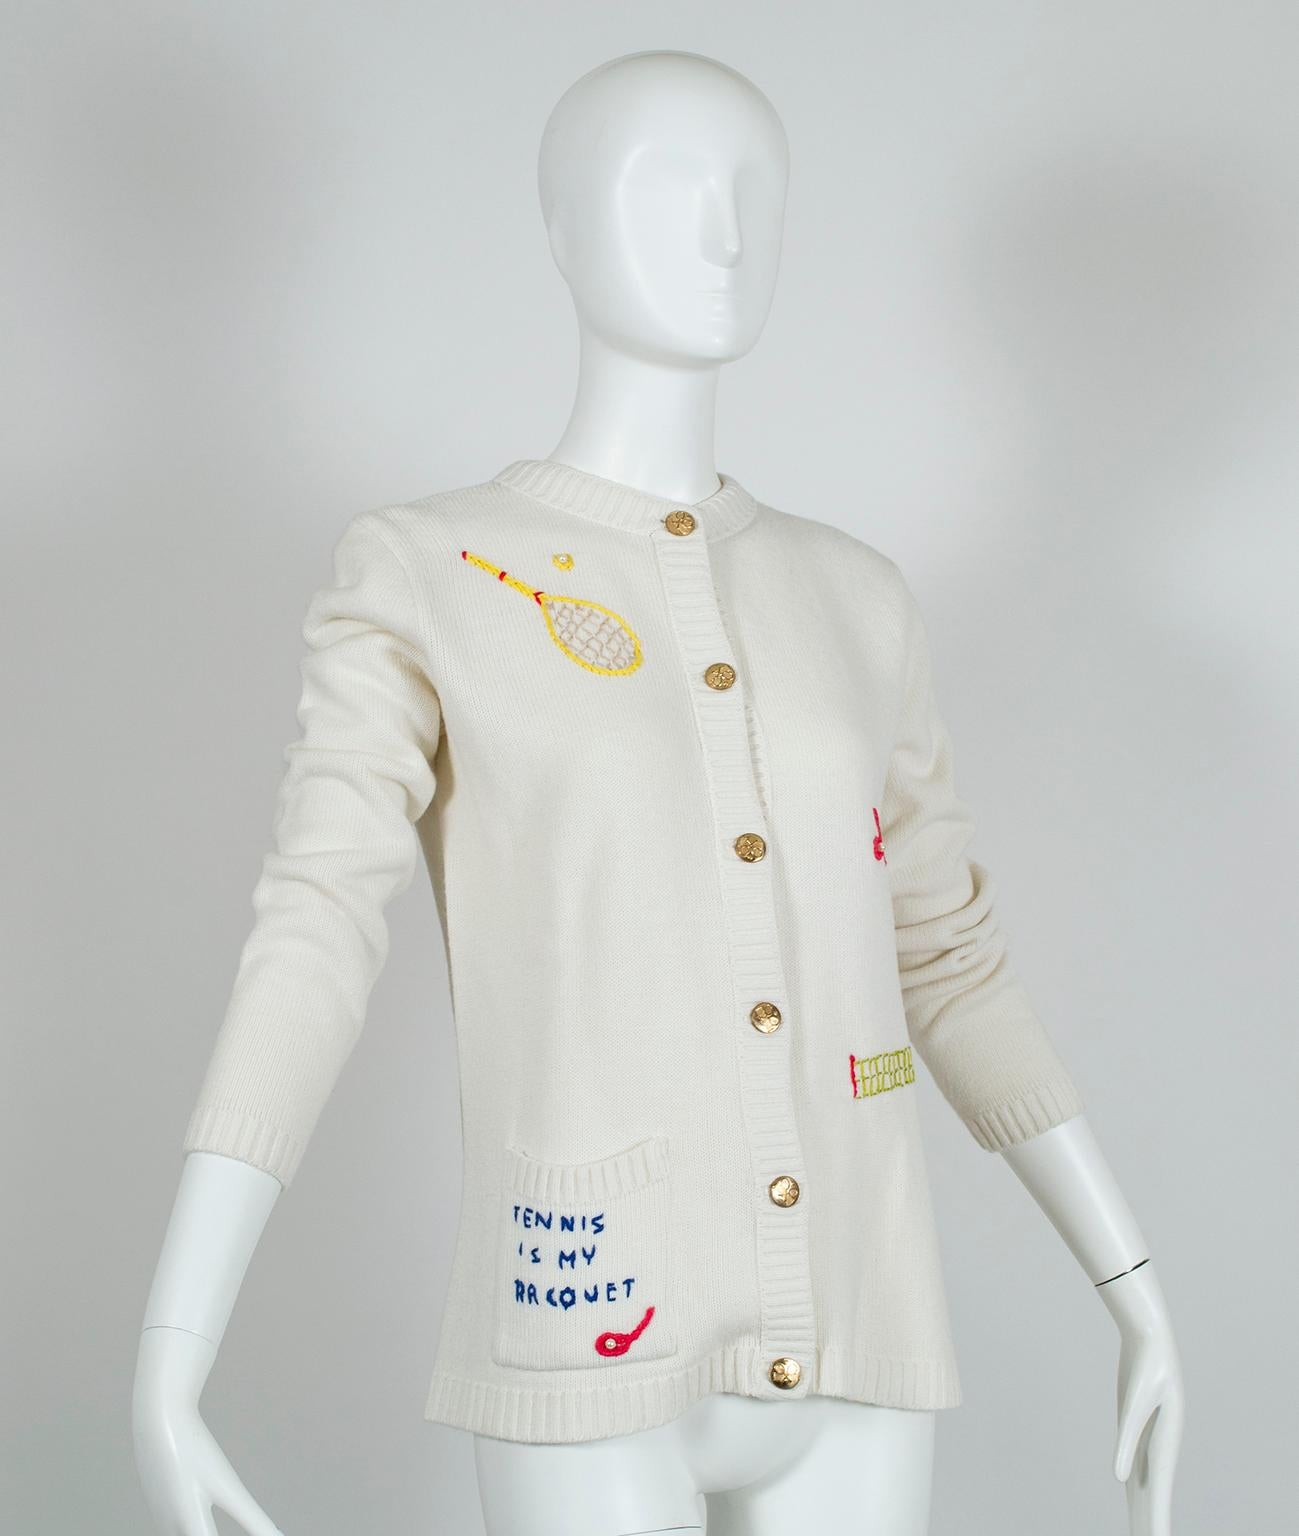 A must for any tennis lover, this unique novelty cardigan will make you feel like Maria Sharapova even if you play like a novice. Lovingly hand made, it is adorned with hand stitched tennis racquets, nets, pearl tennis balls and stitched phrases on